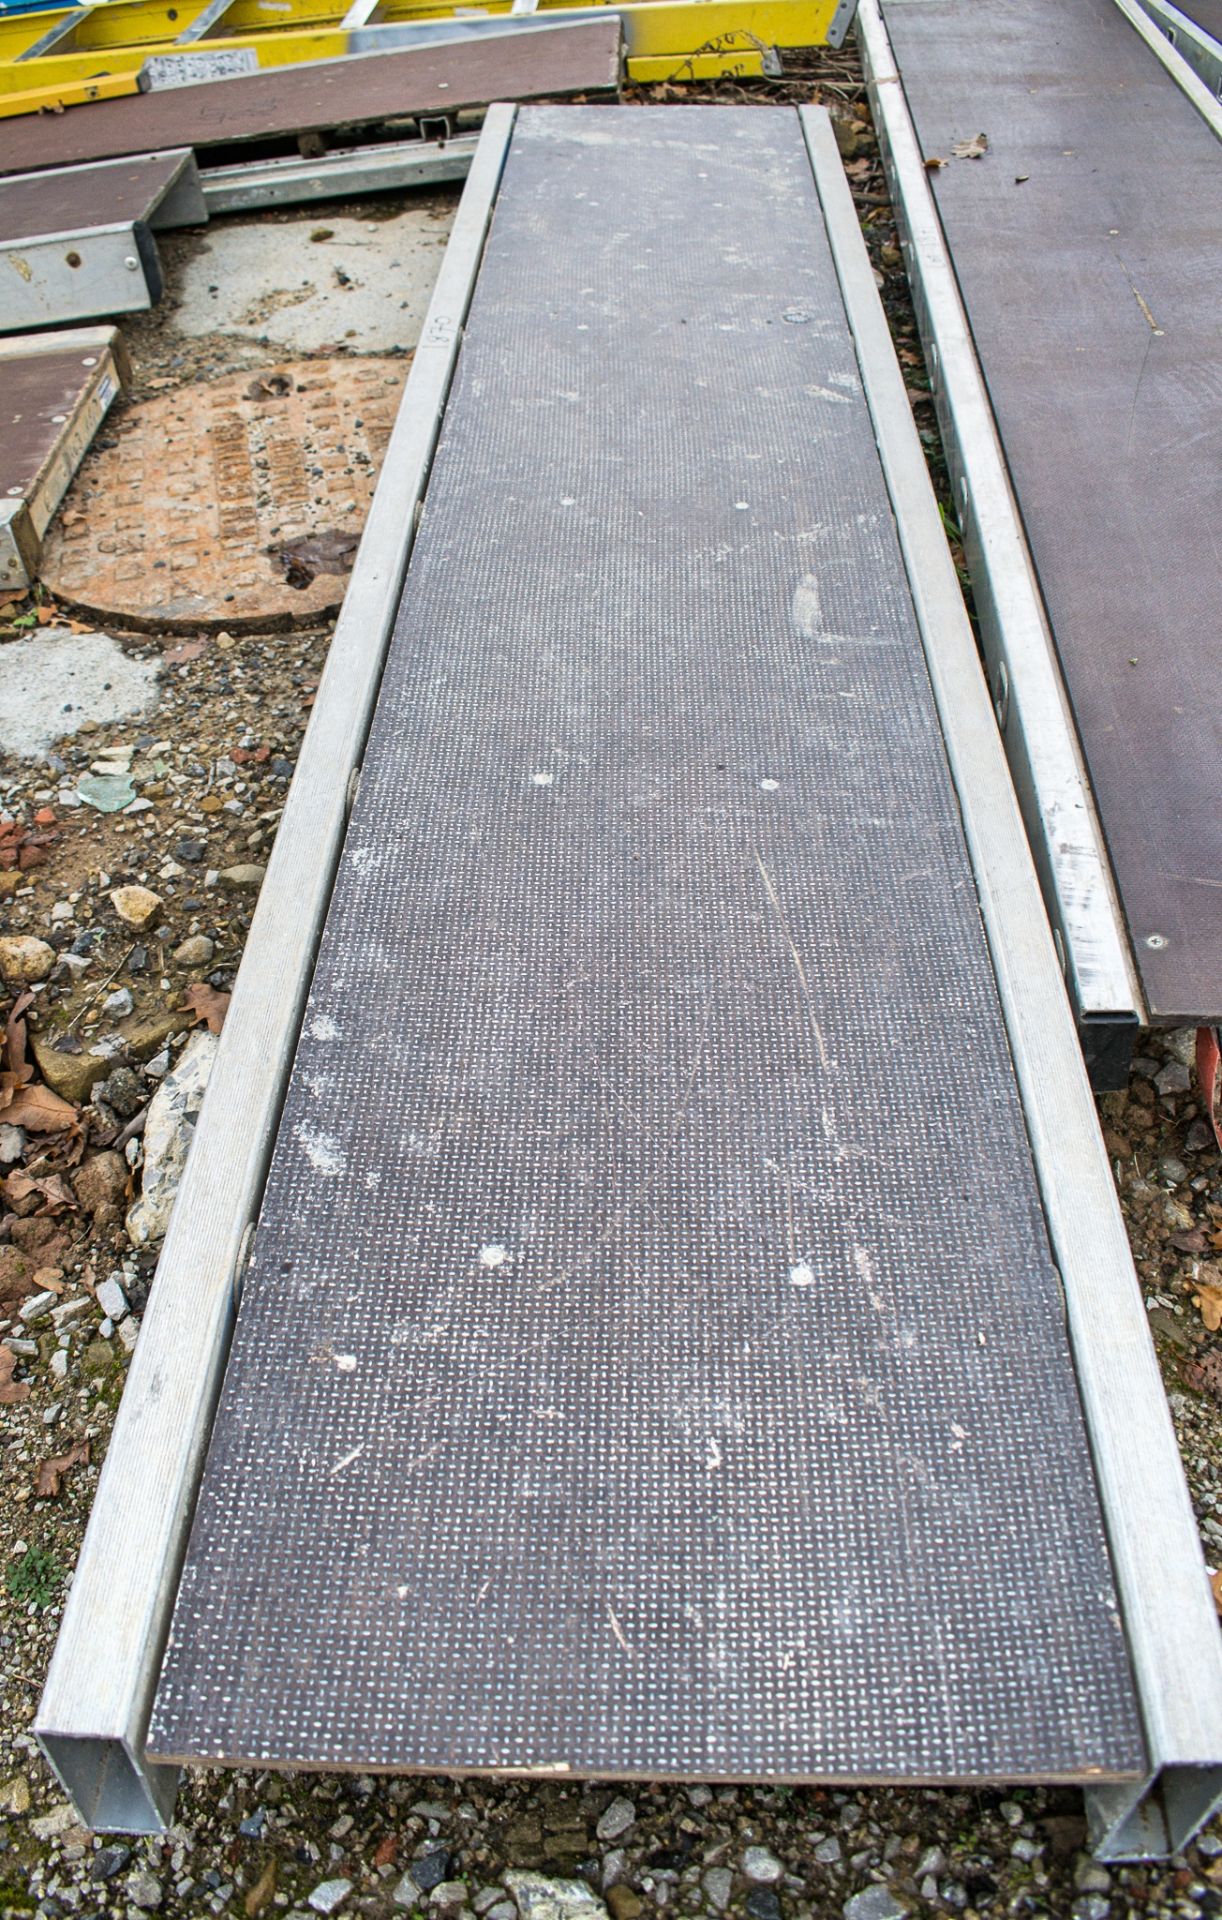 Aluminium staging board approximately 8ft long